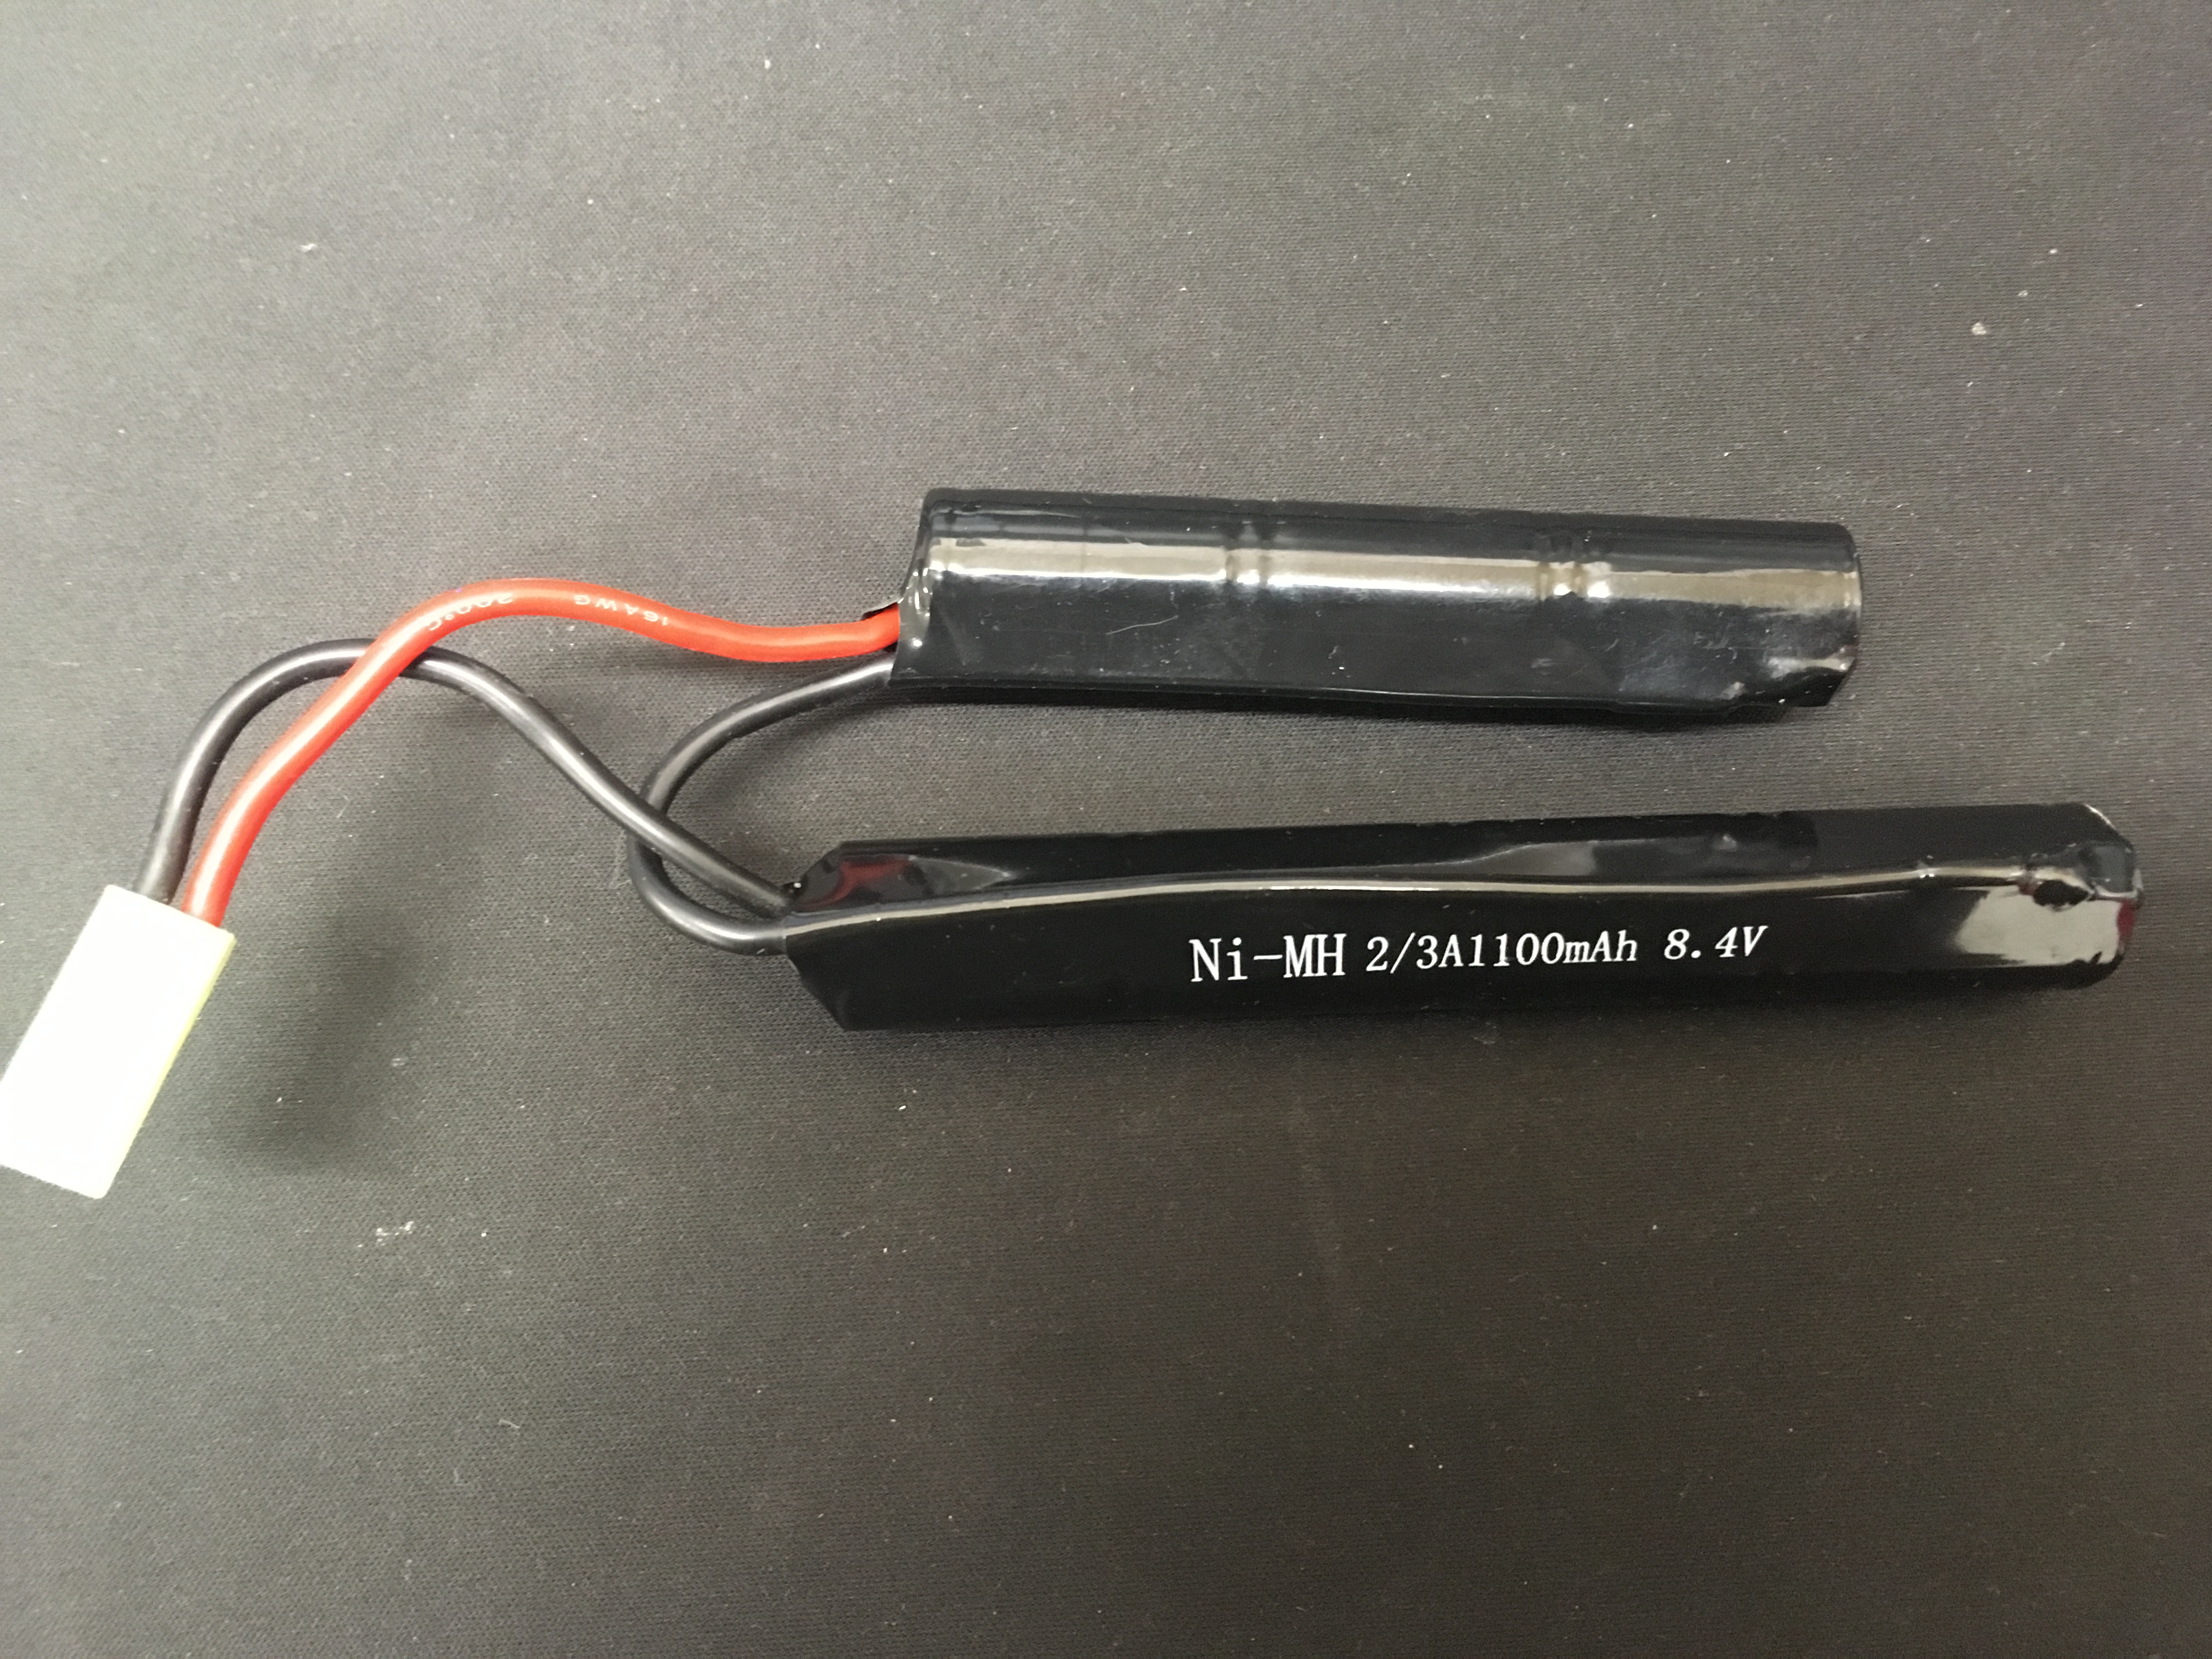 Beginners long do I charge my Airsoft NiMH battery for?